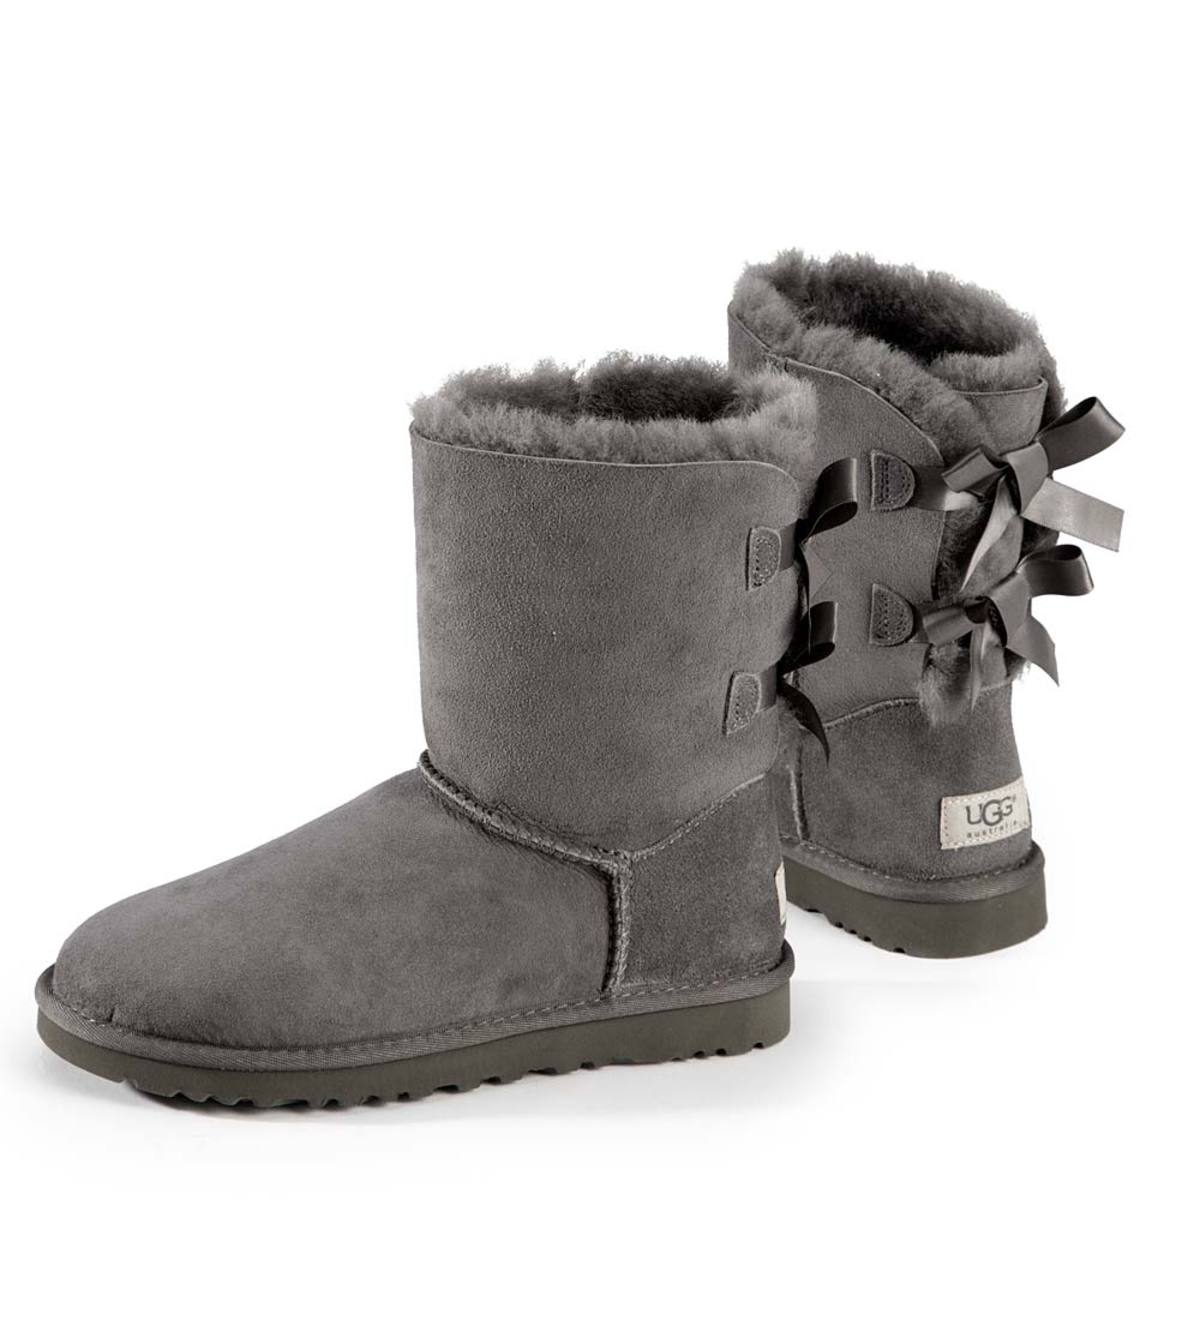 ugg boots grey with bows